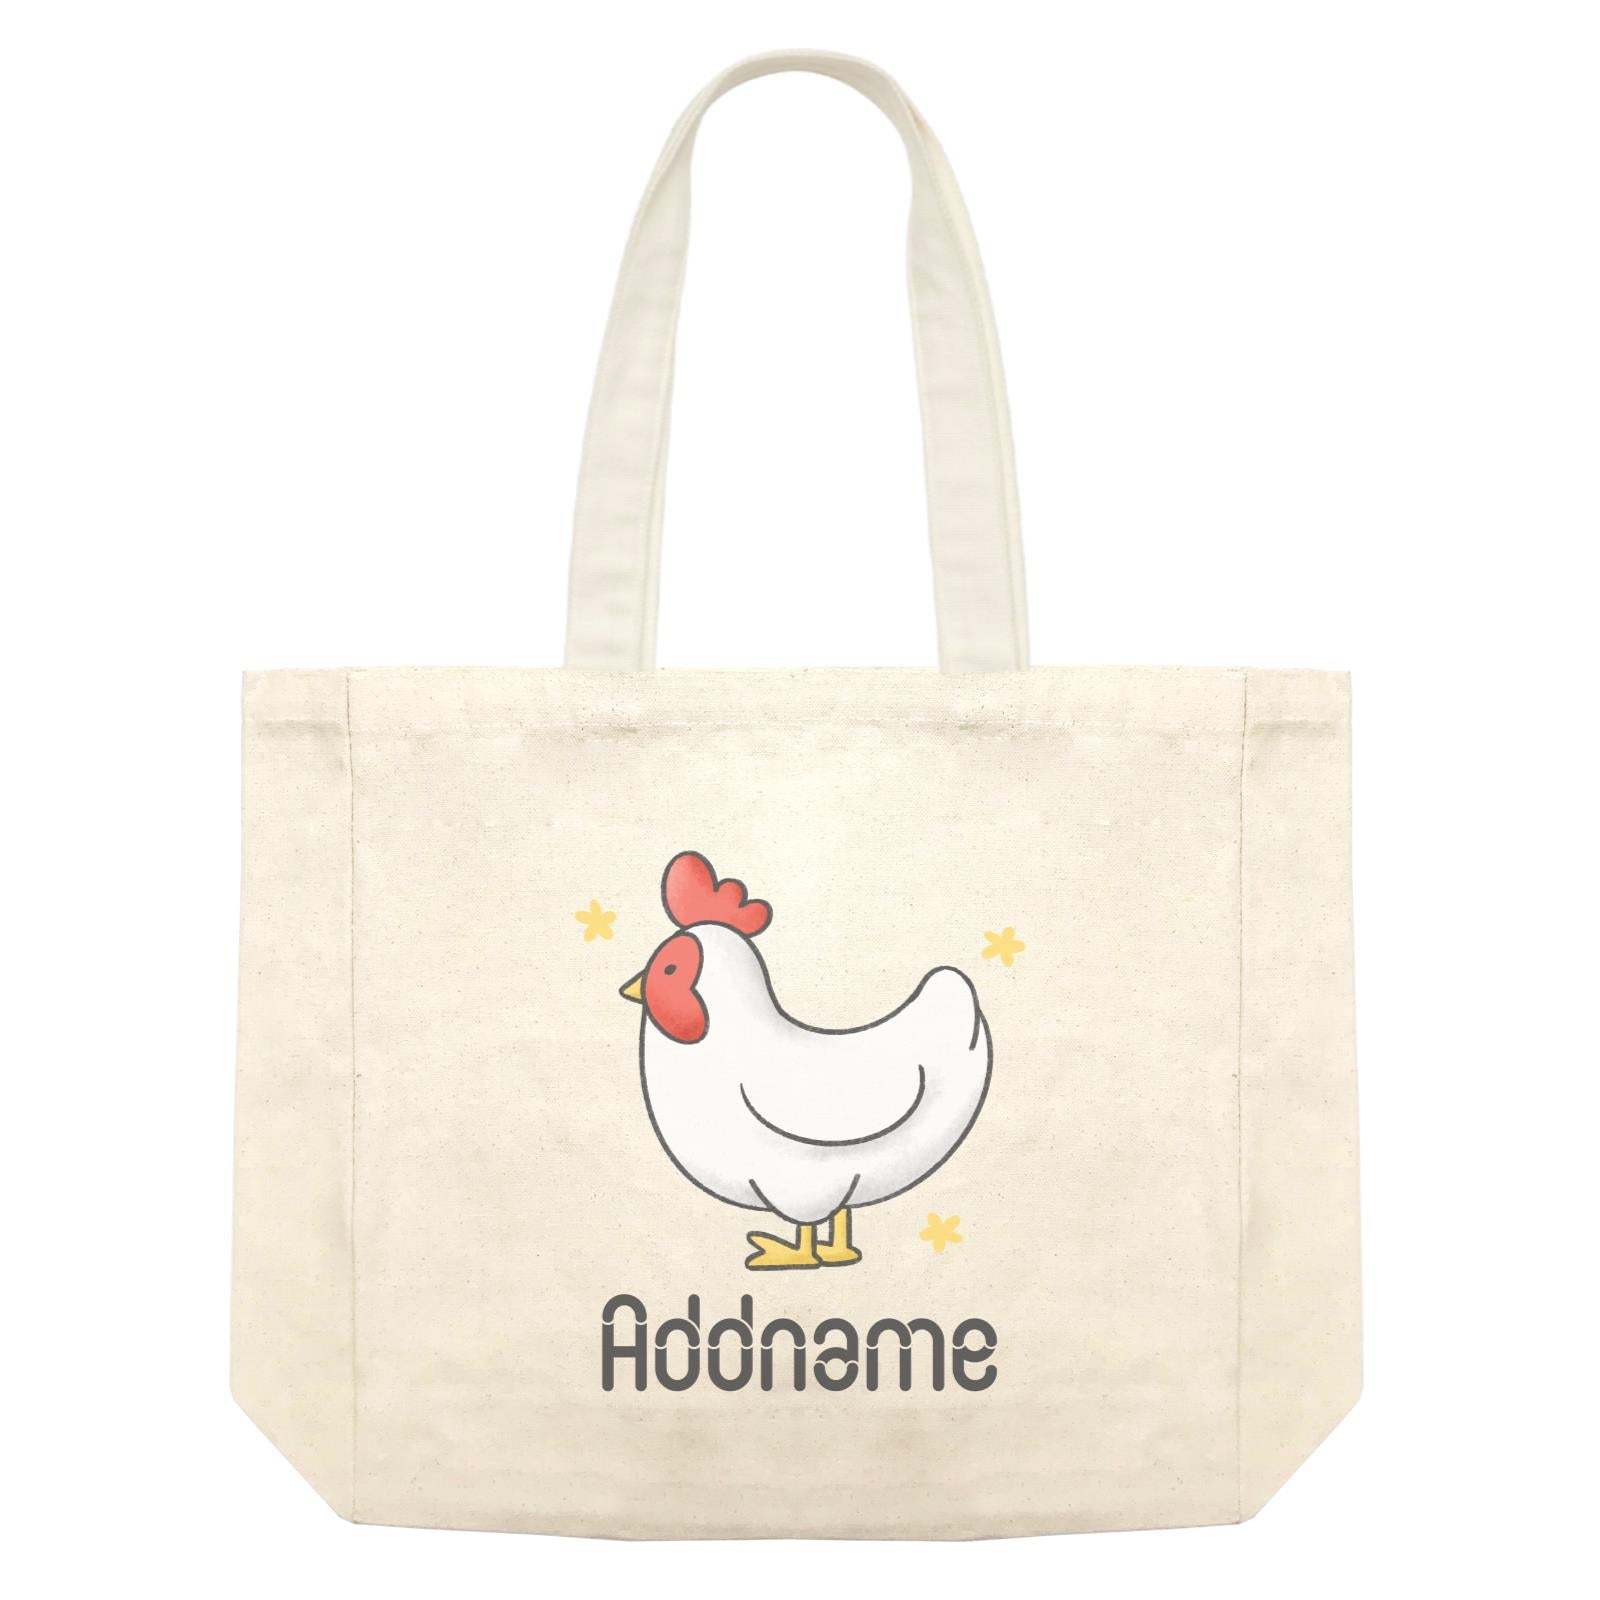 Cute Hand Drawn Style Rooster Addname Shopping Bag